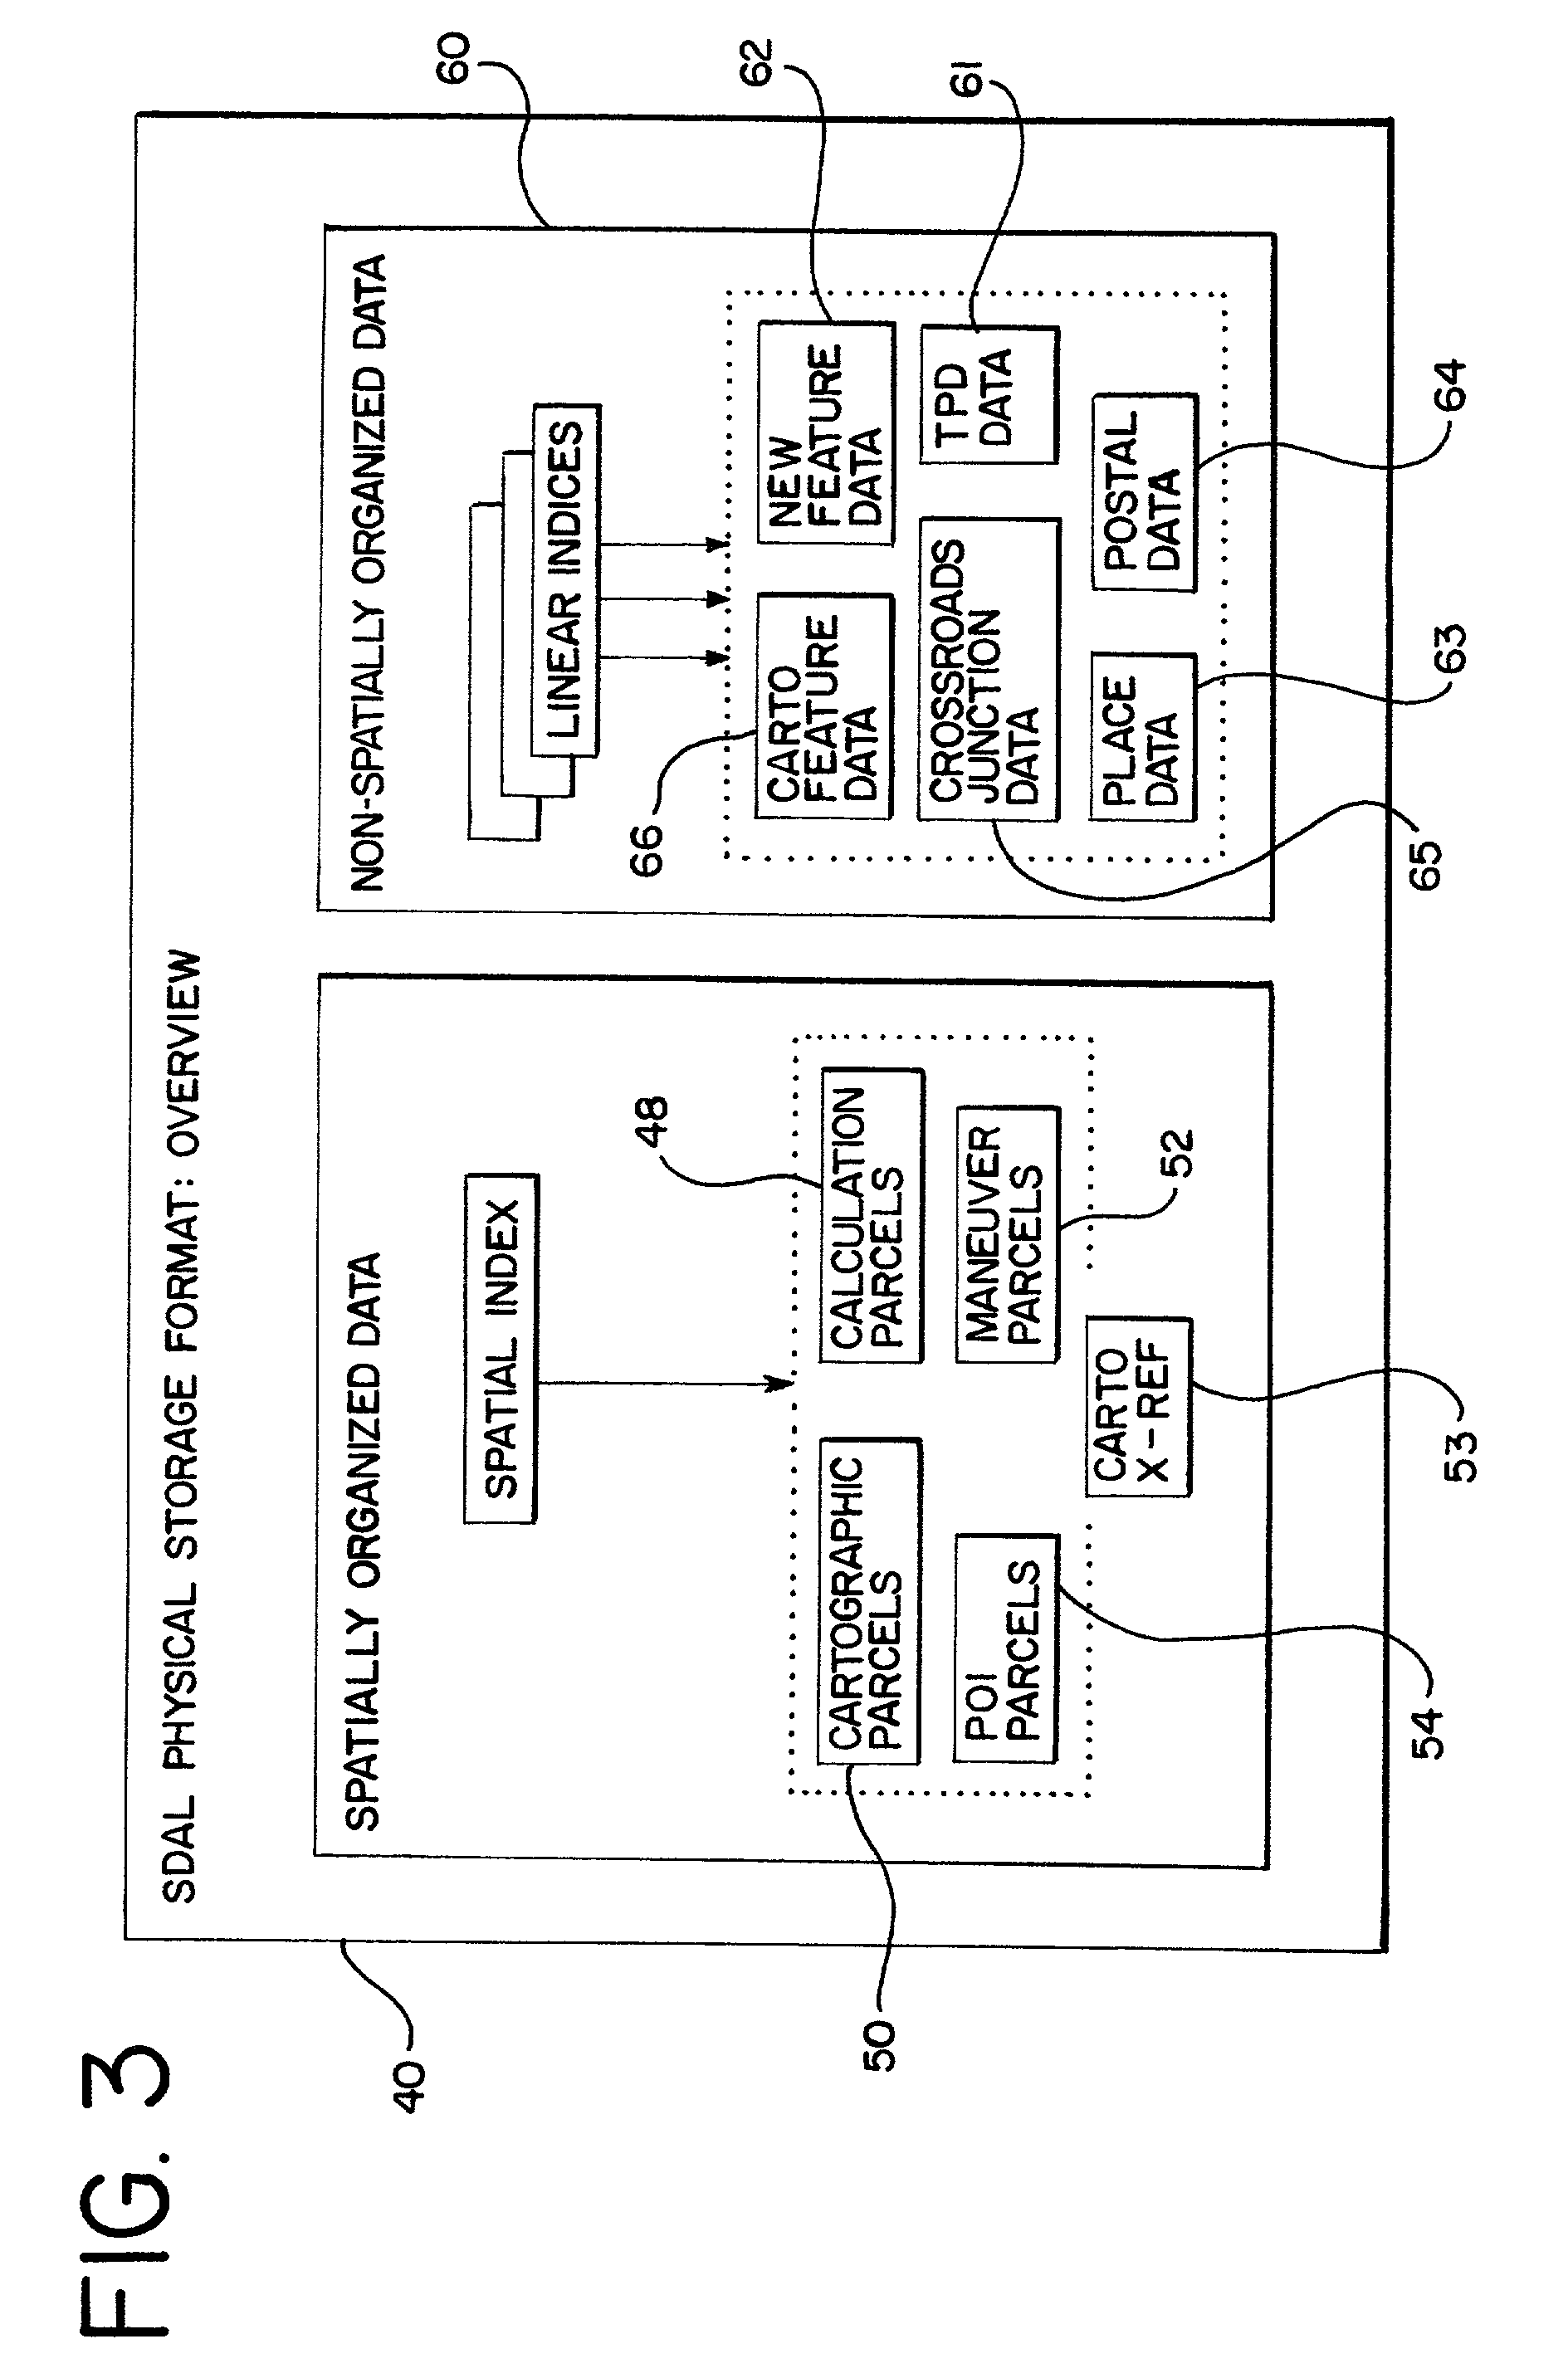 System and method for use and storage of geographic data on physical media